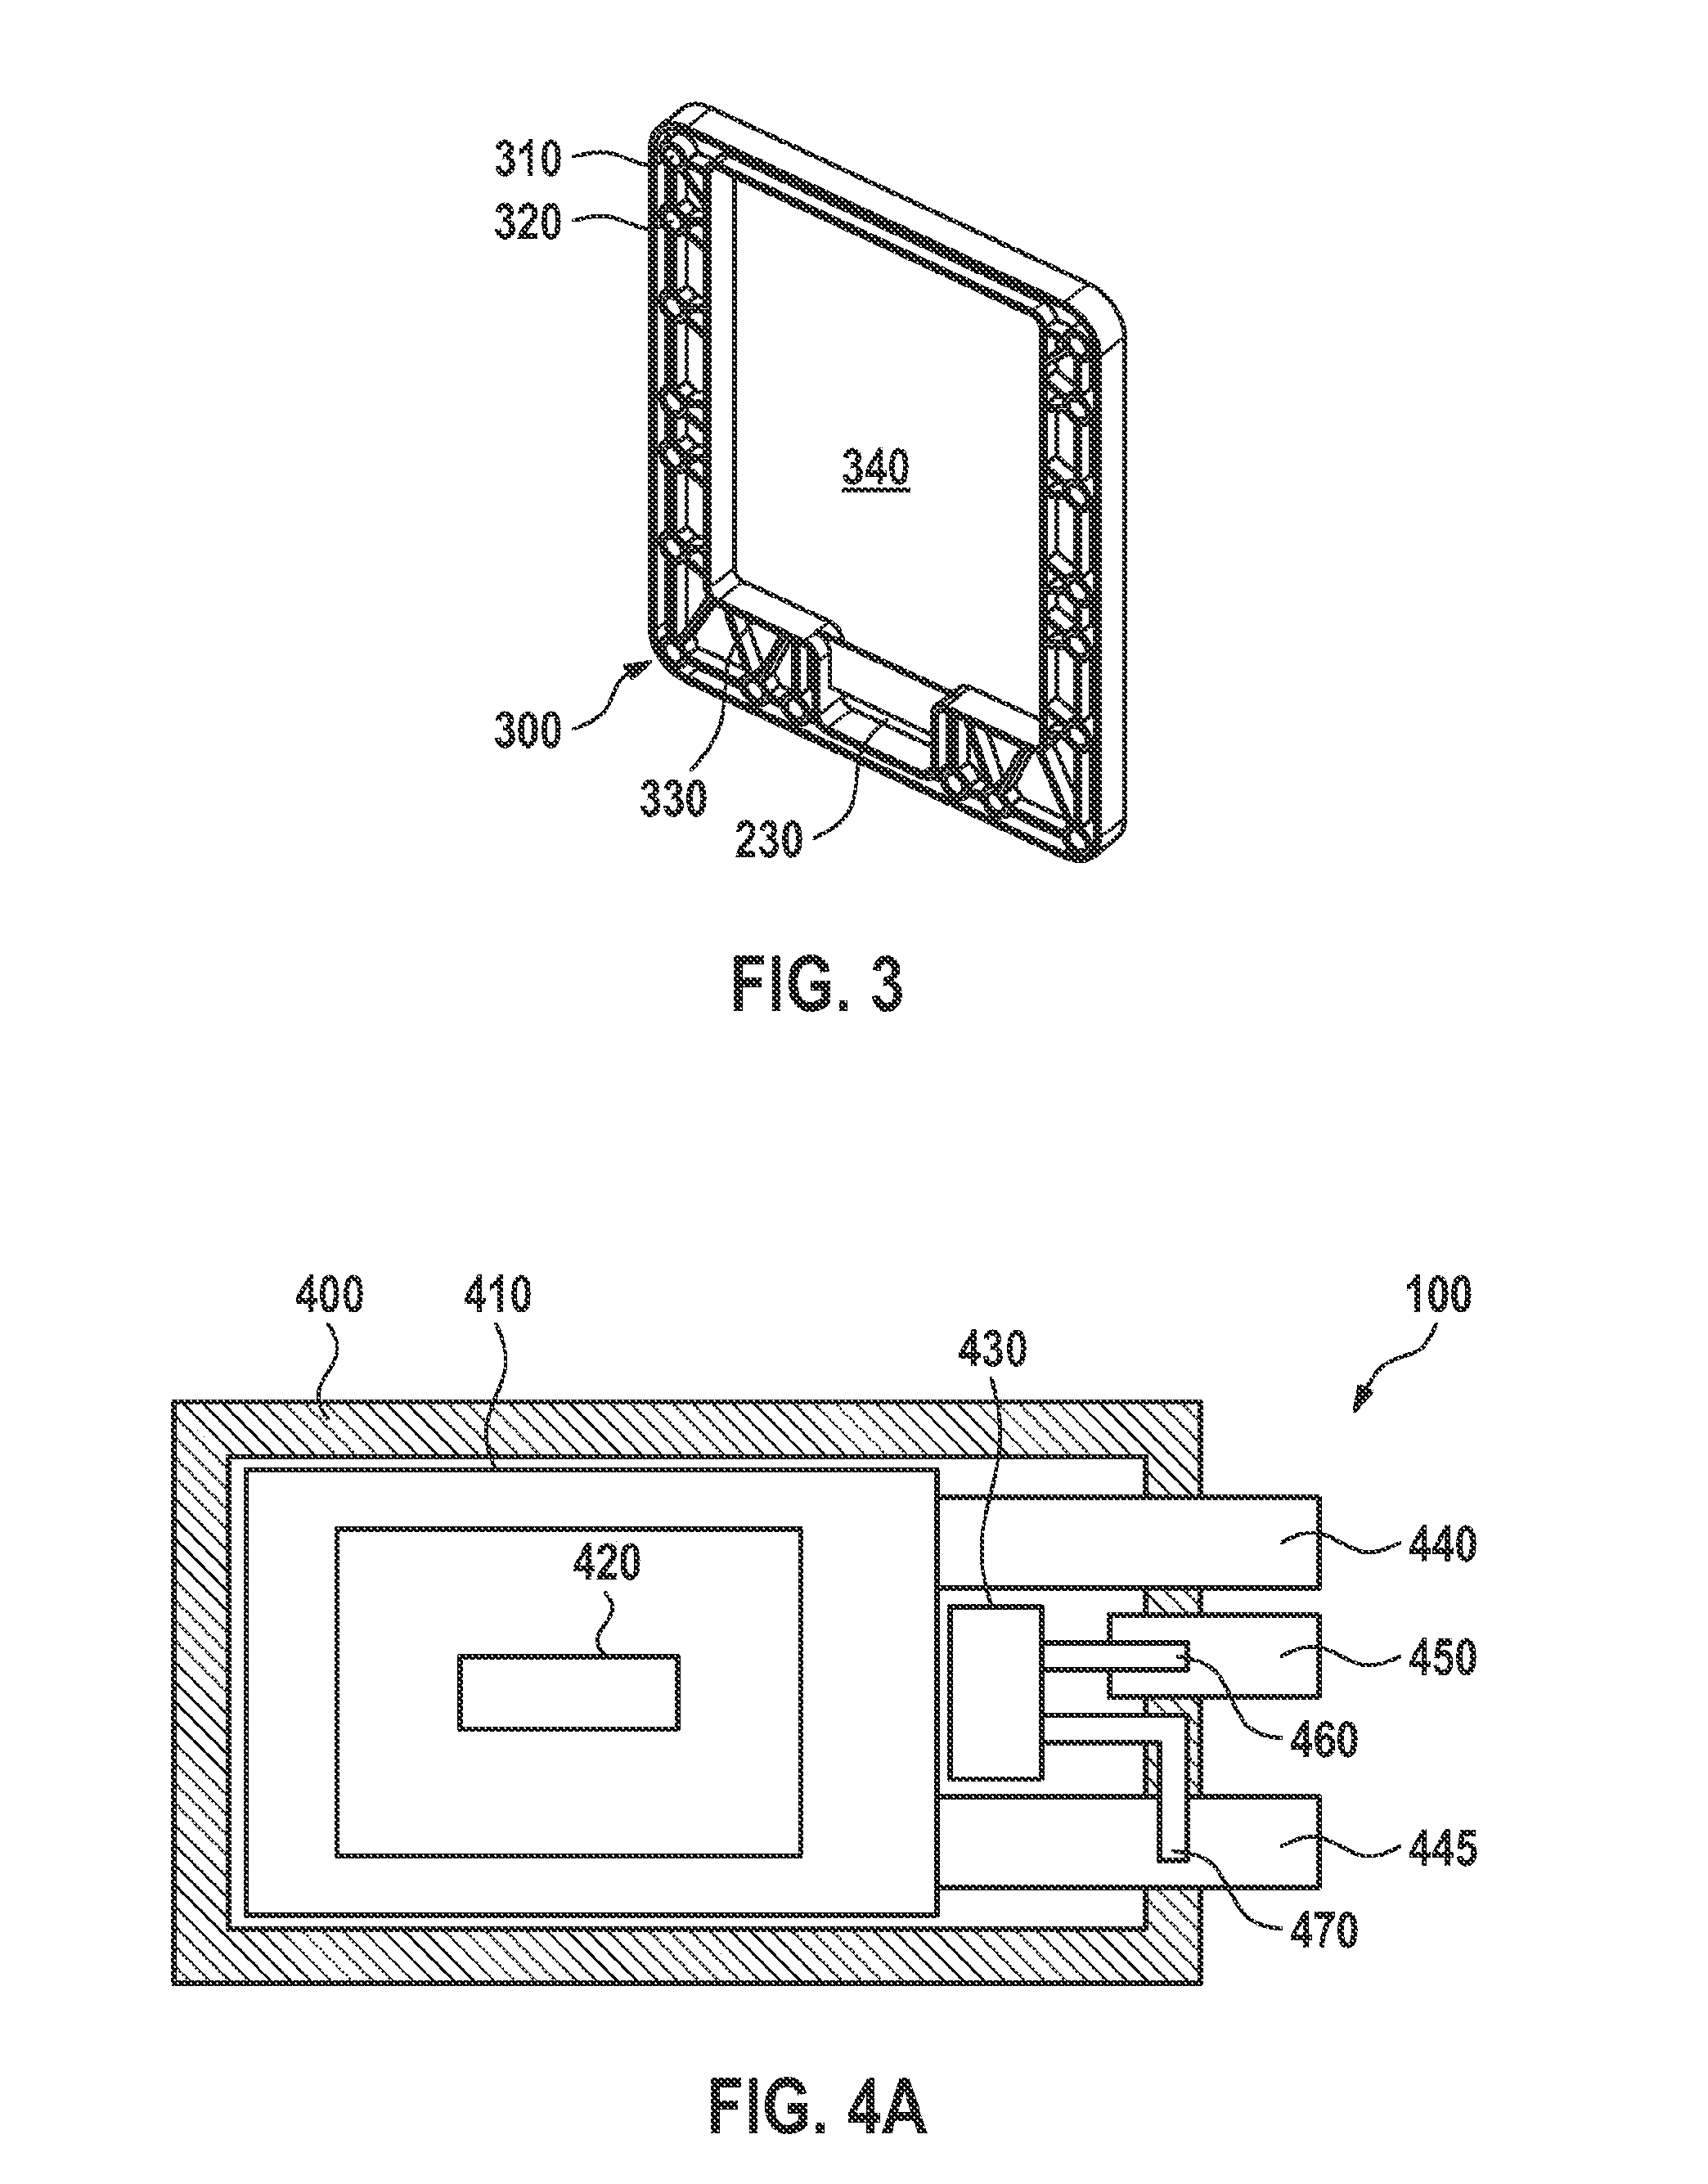 Encasing film for a galvanic element, electrochemical store, electrochemical storage system, flexible film for an encasing of a galvanic element, and method for determining a state variable of an electrochemical store